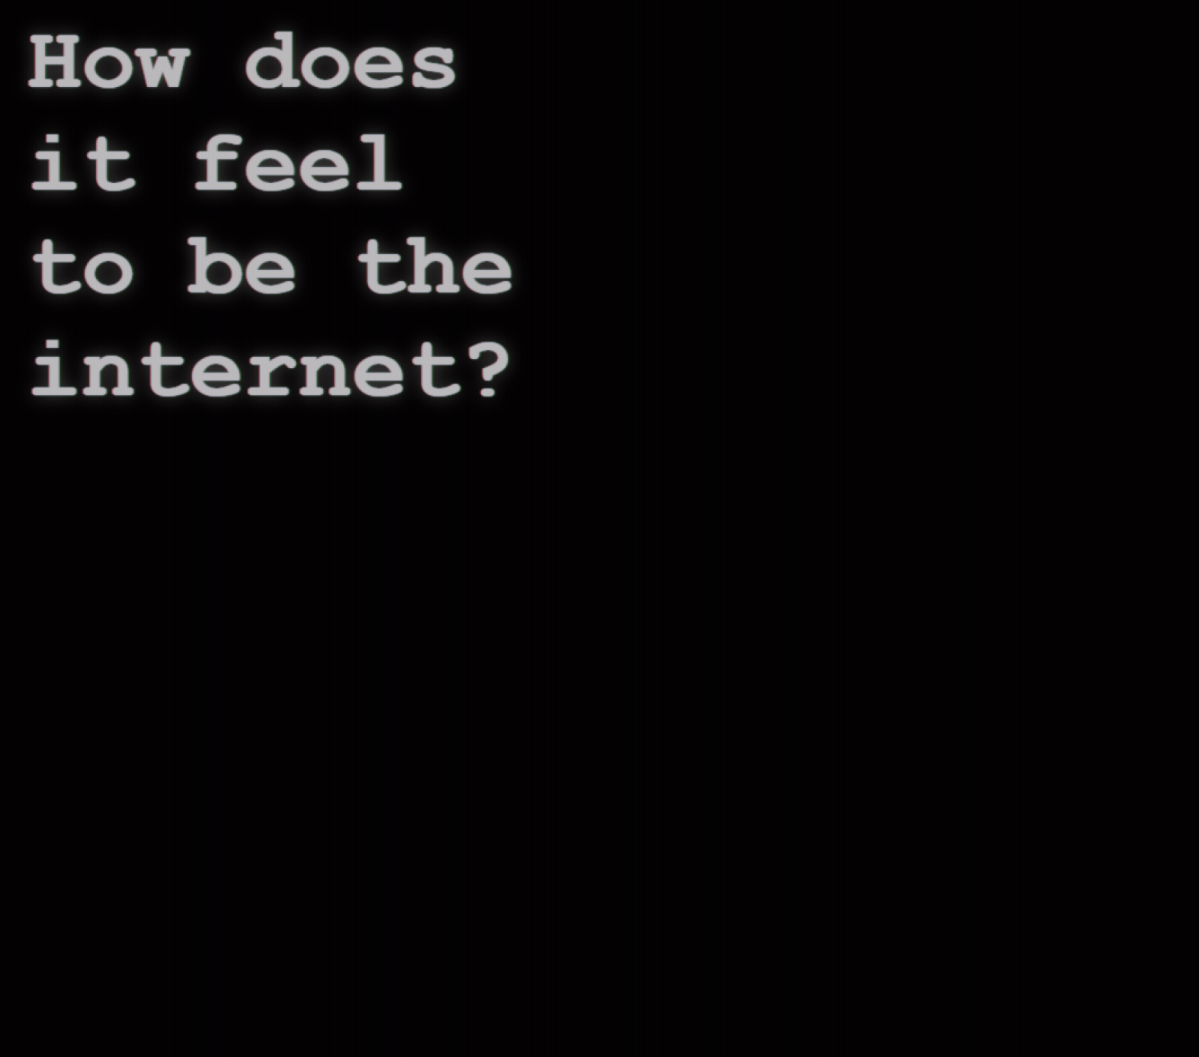 How does it feel to be the Internet?